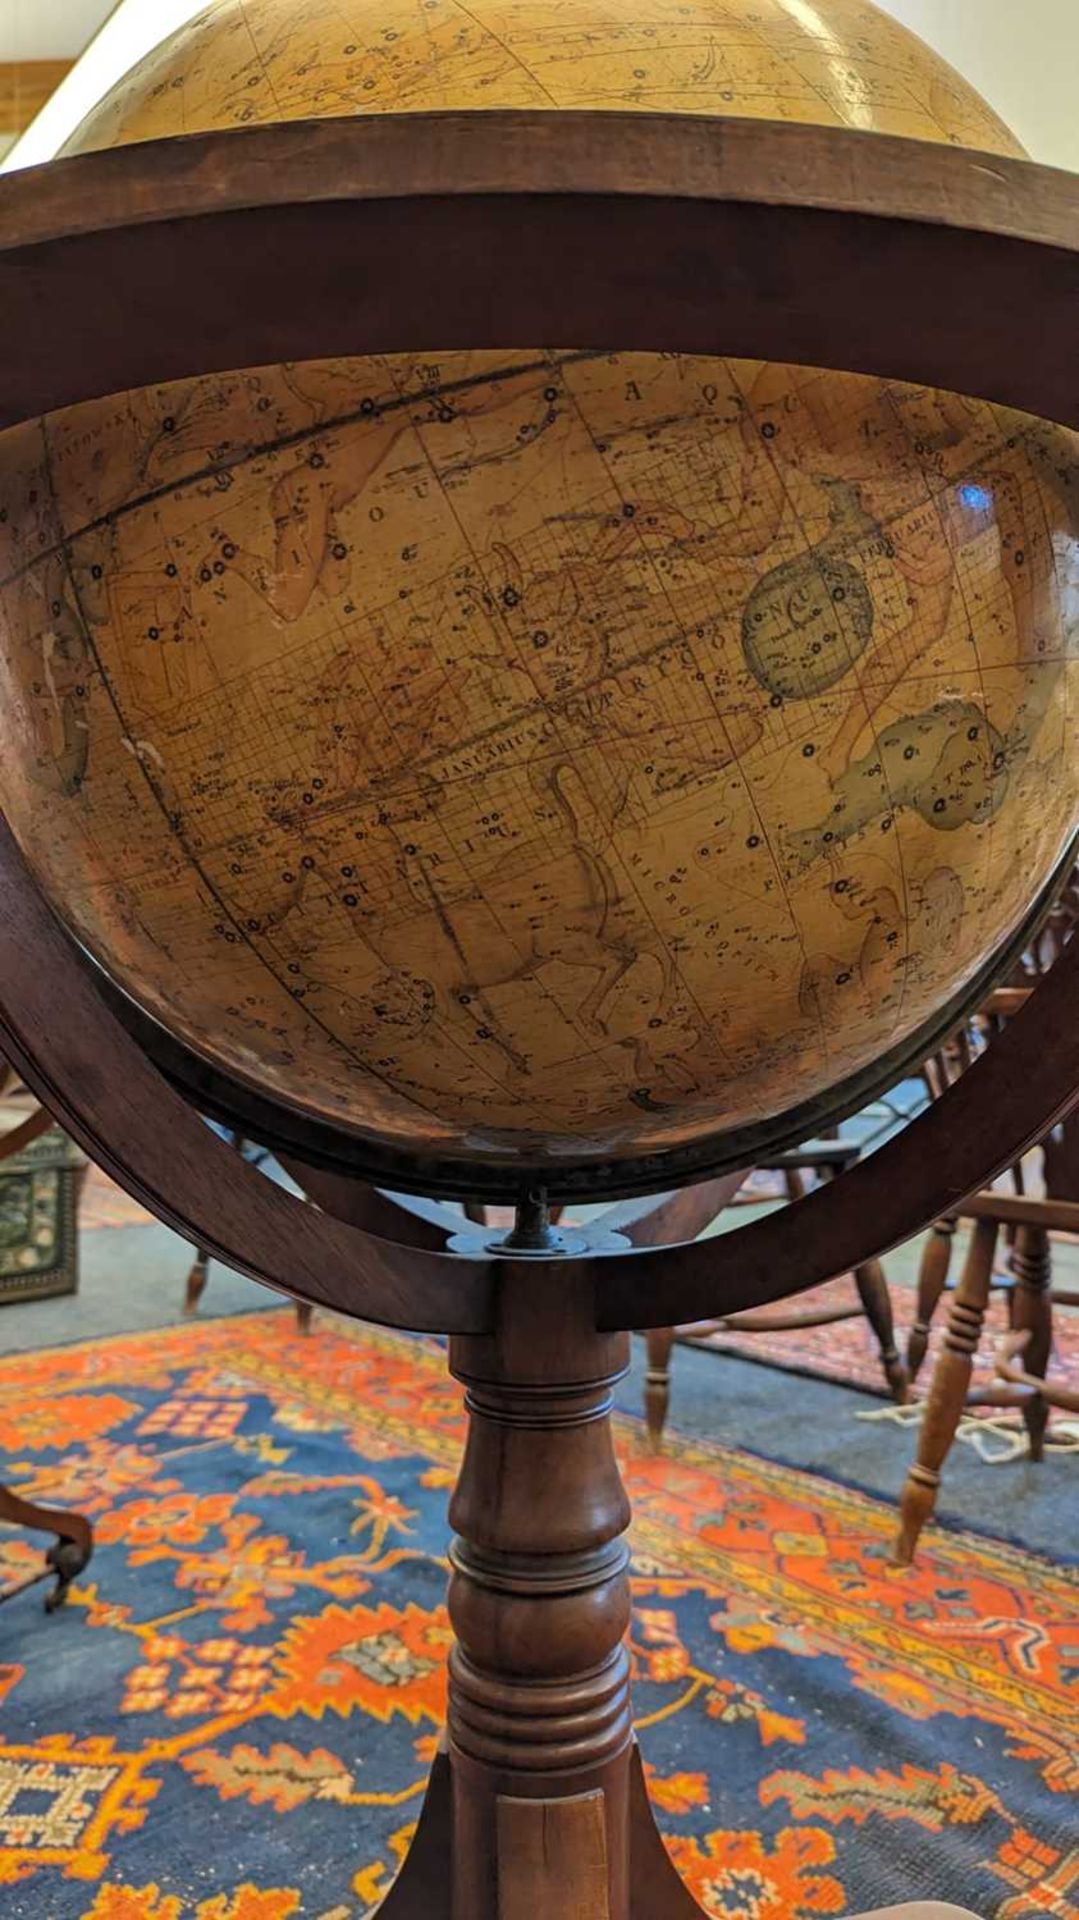 A large celestial library globe by J & W Cary, - Image 22 of 84